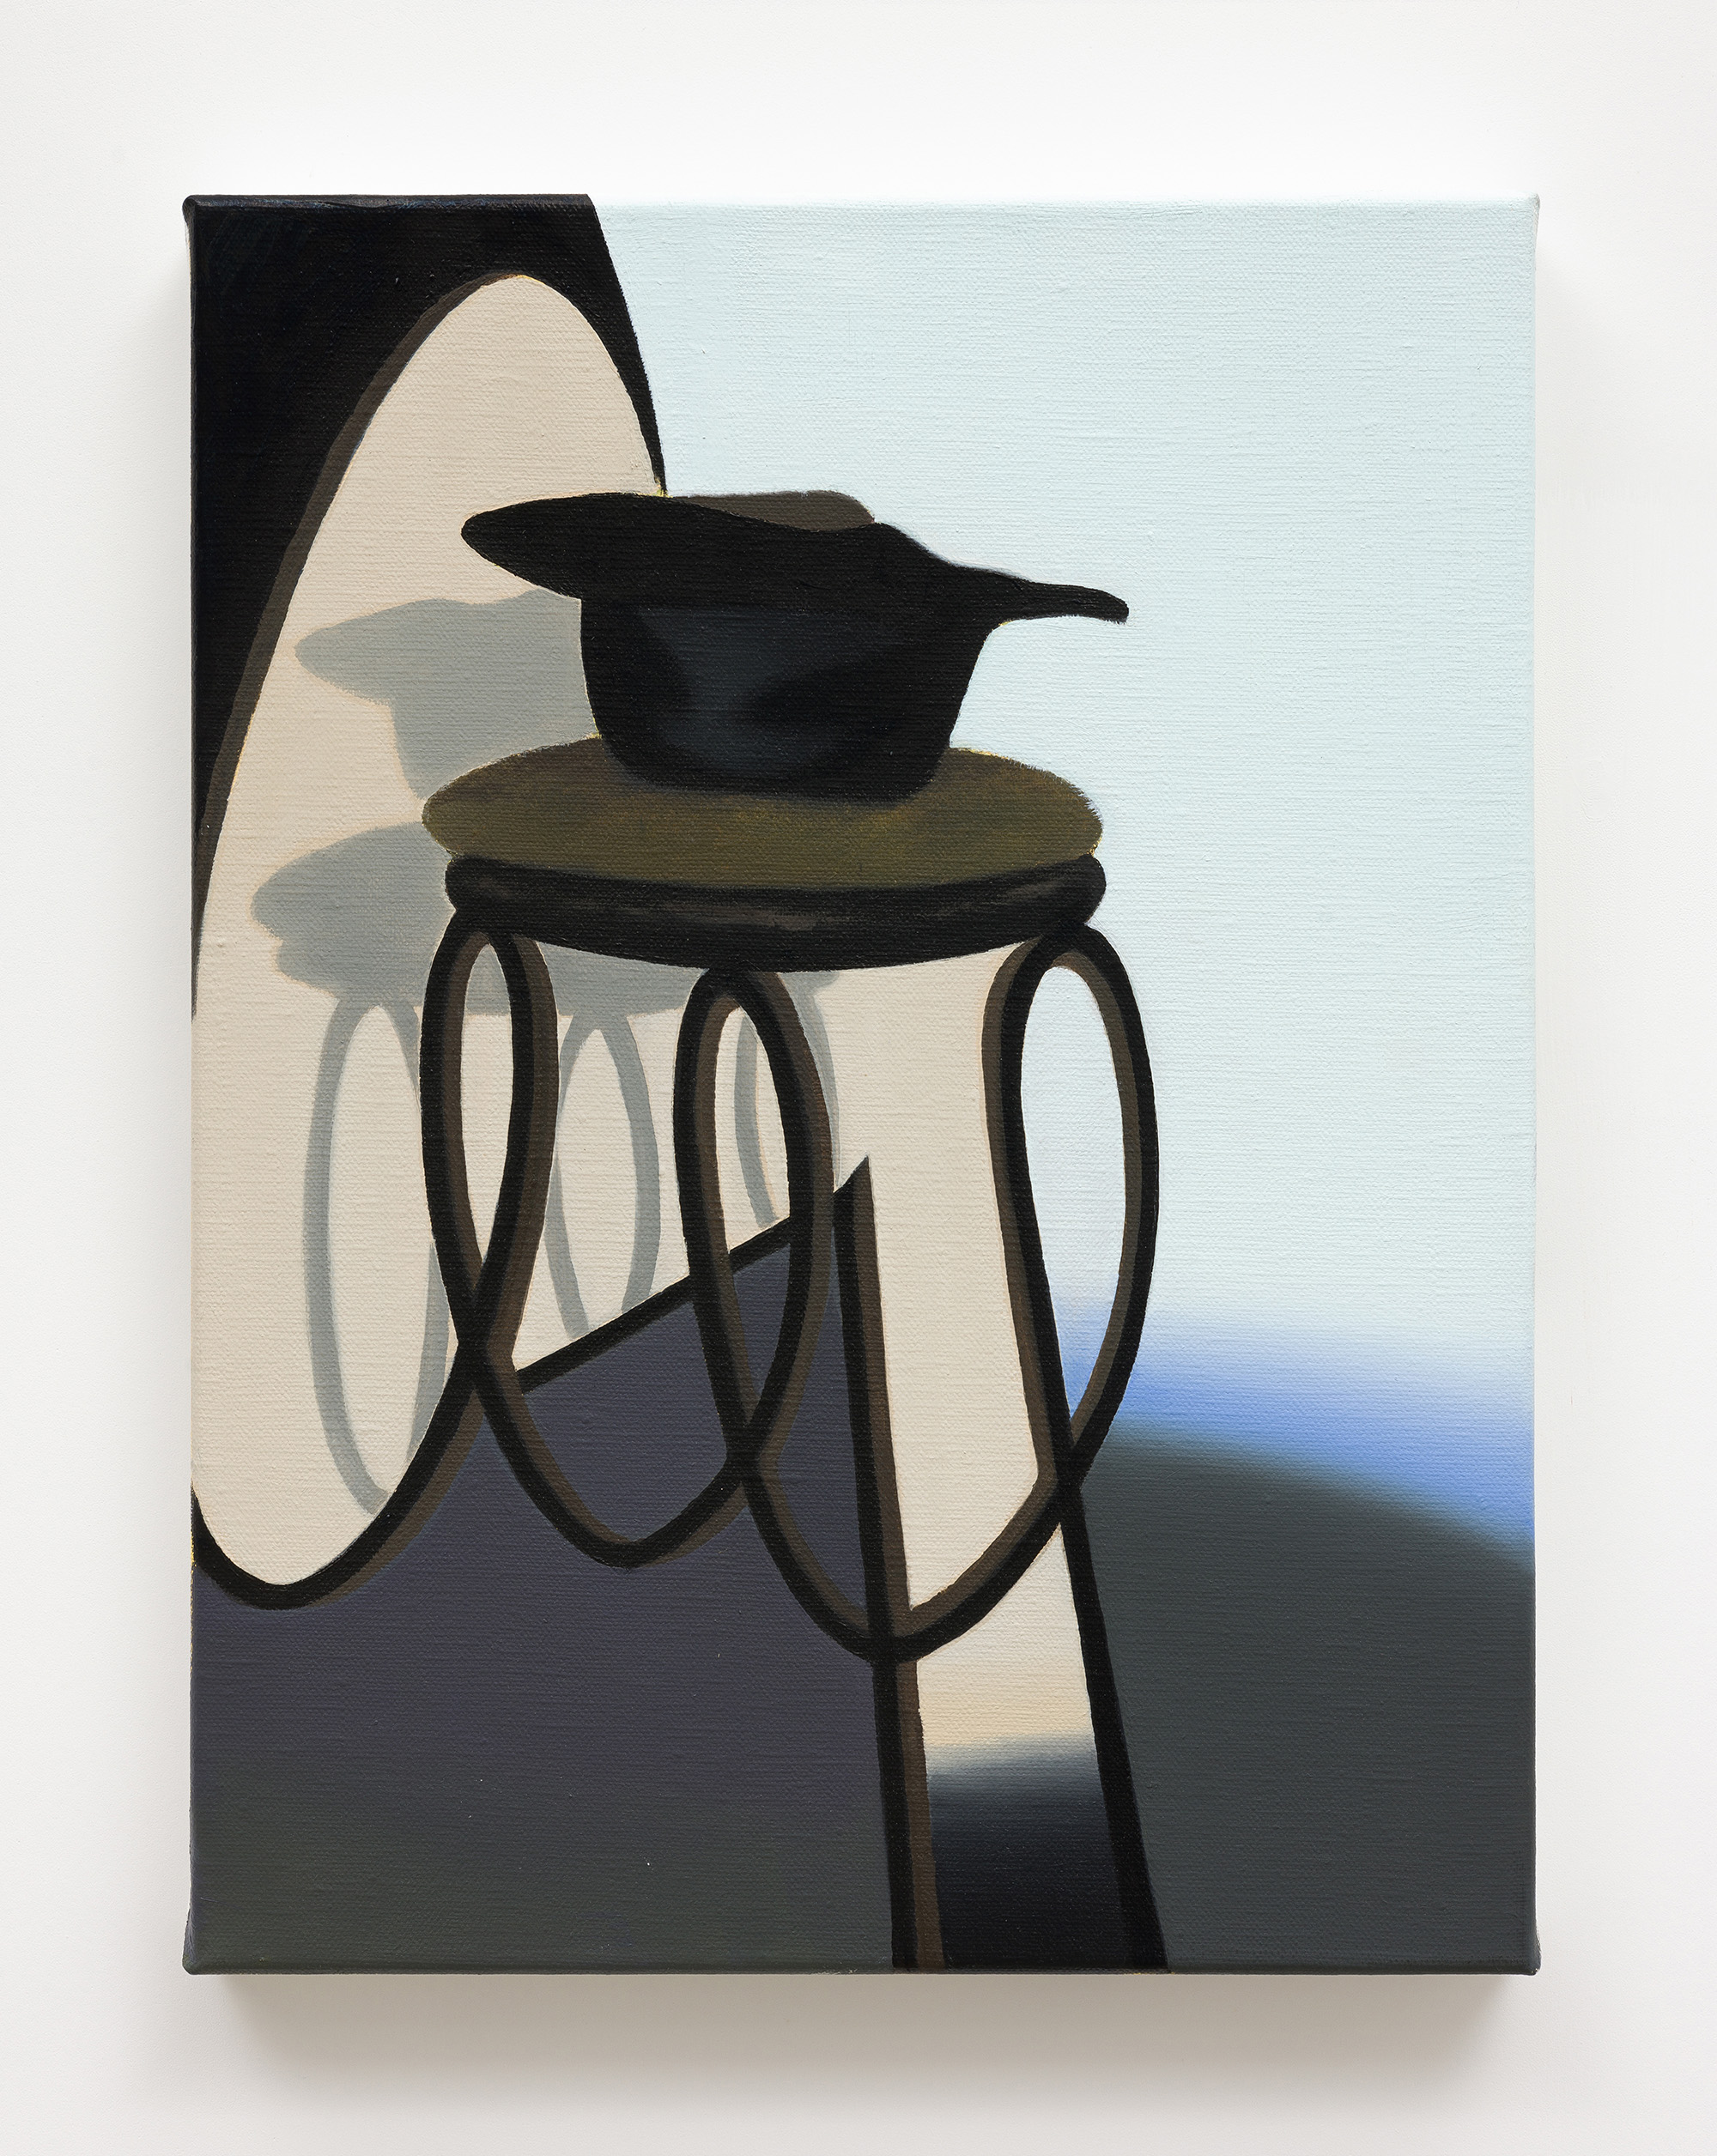 Shi Jiayun, The Hat, 2022, Oil on linen, 40 x 30 cm, 15 3/4 x 11 3/4 in.